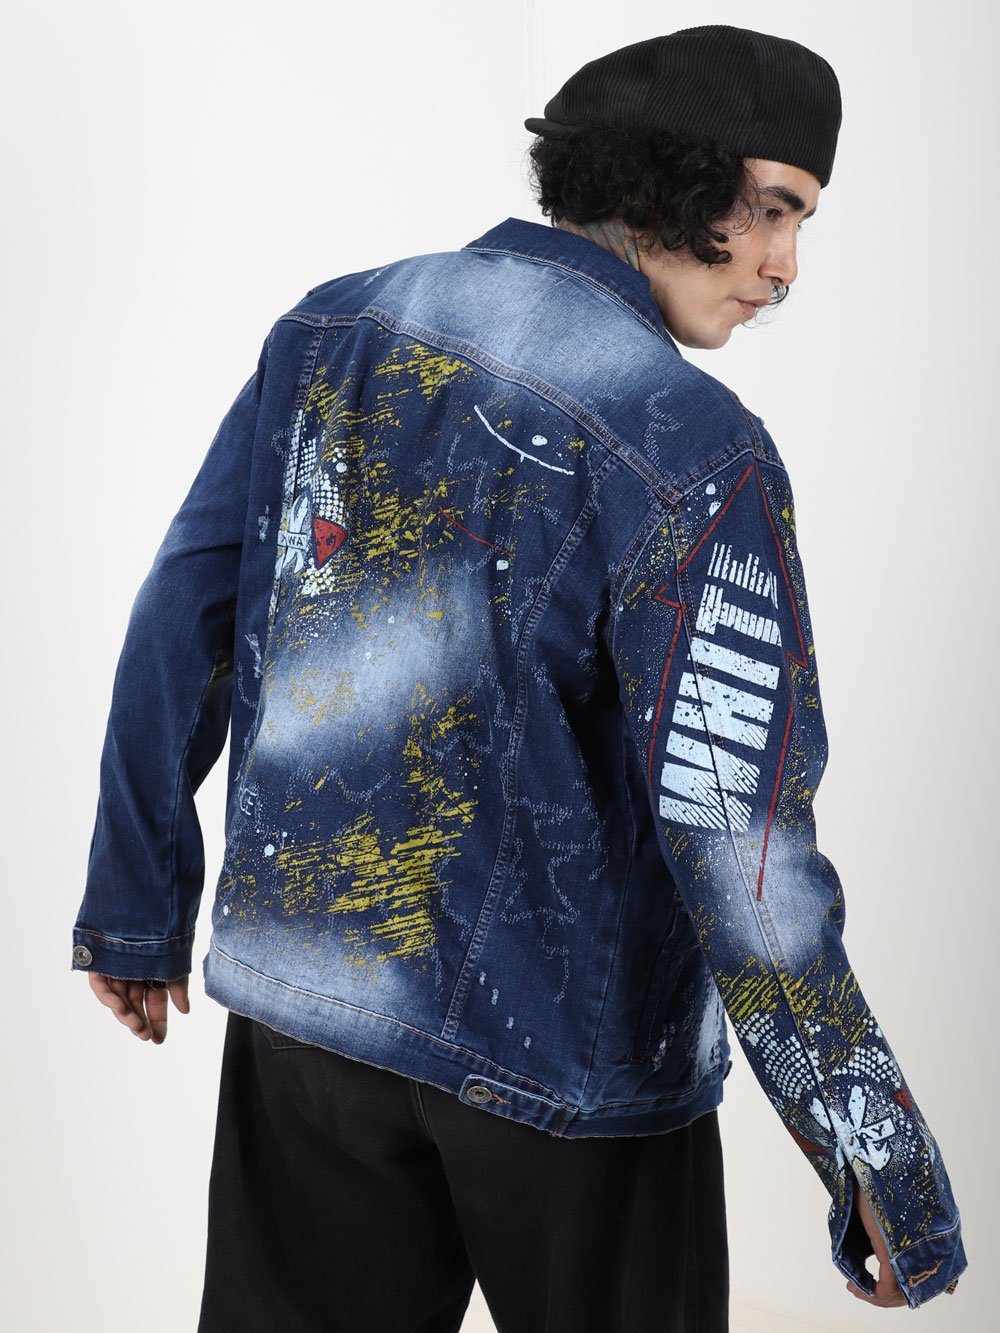 The back of a man wearing an OLD PAINTING denim jacket.